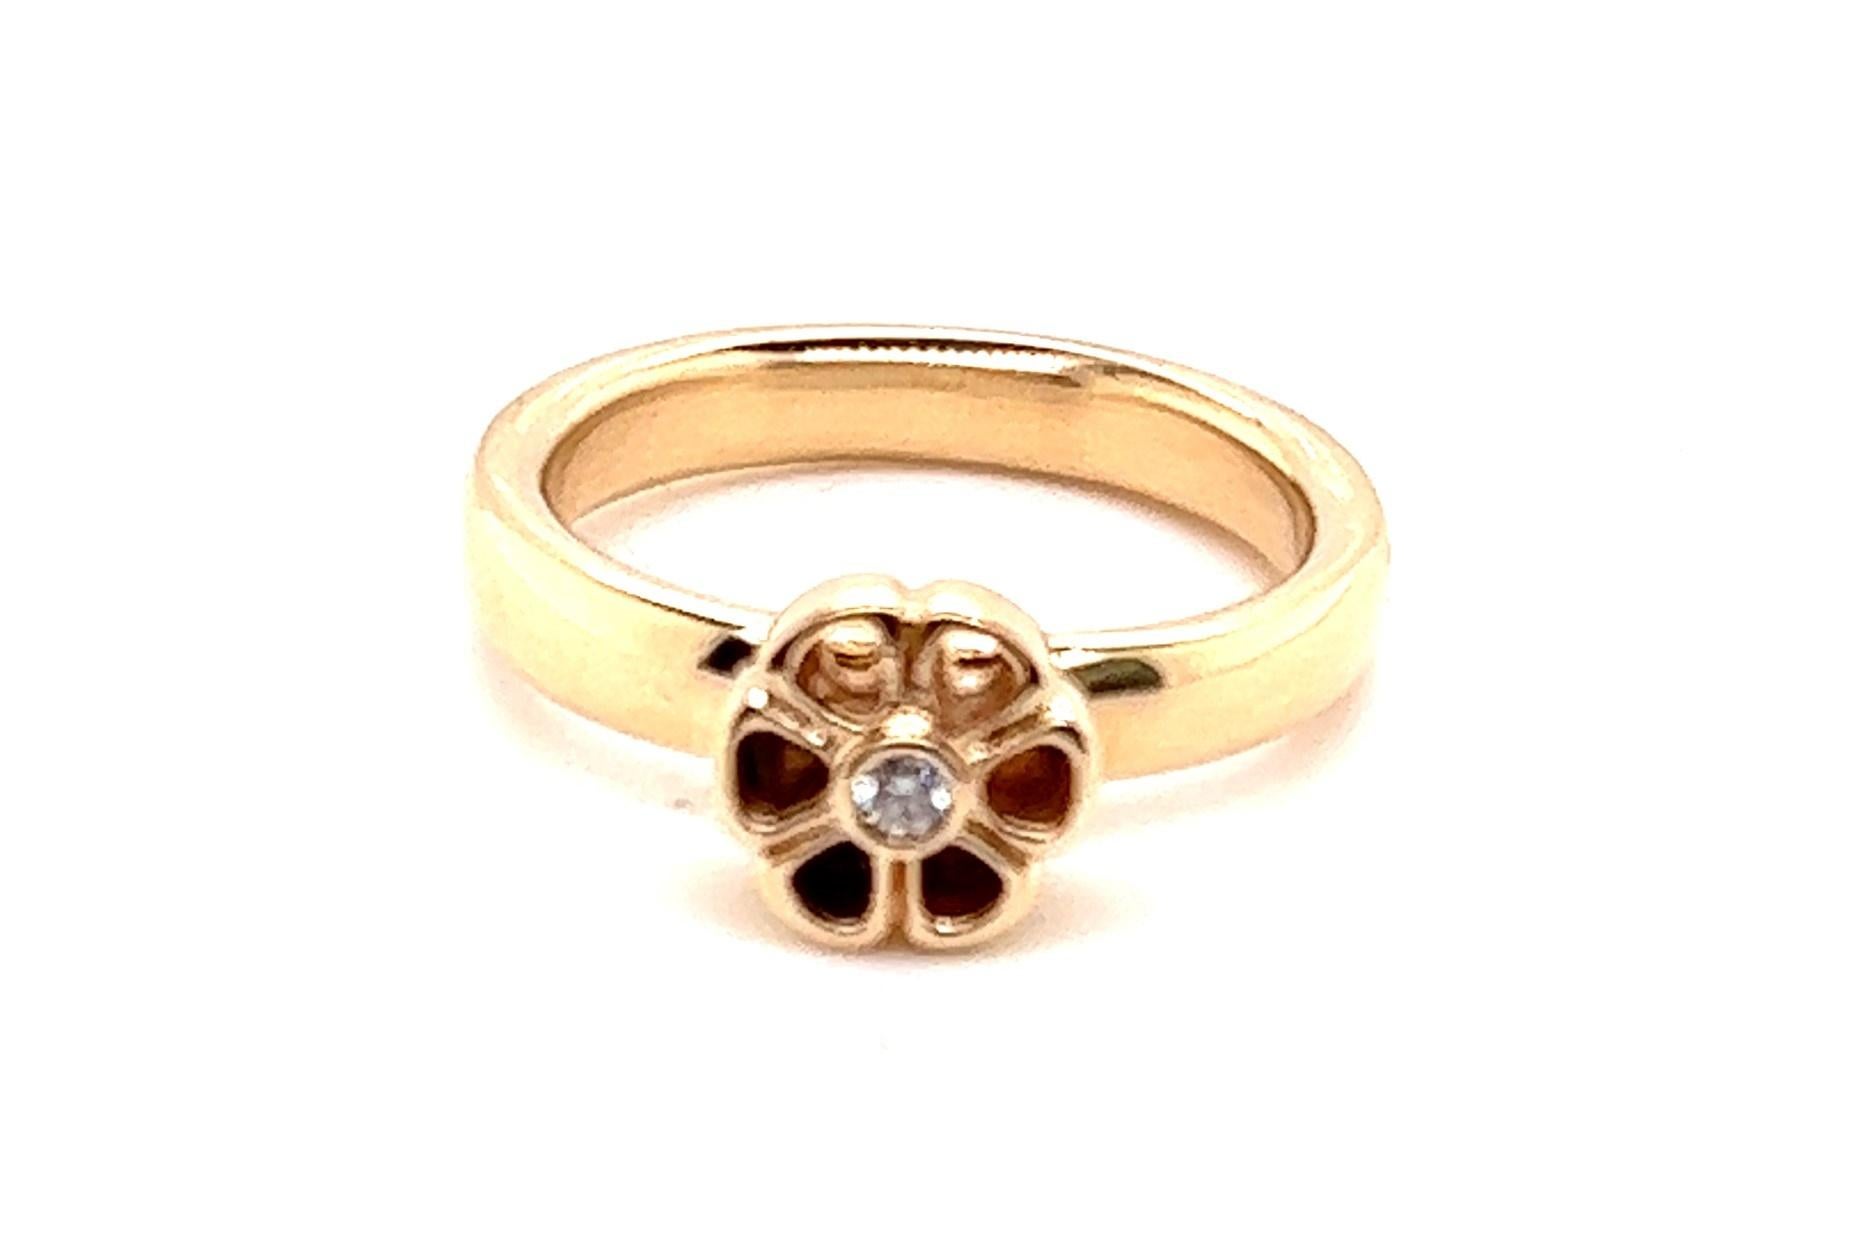 14KT YG PANDORA FLOWER RING WITH .05CT G-H/VS2-SI1 DIAMOND. 
The petals of the flower are open and will show through whatever is behind it. There are 3 photos showing the petals and how they look in different backgrounds. 

The band is wide and